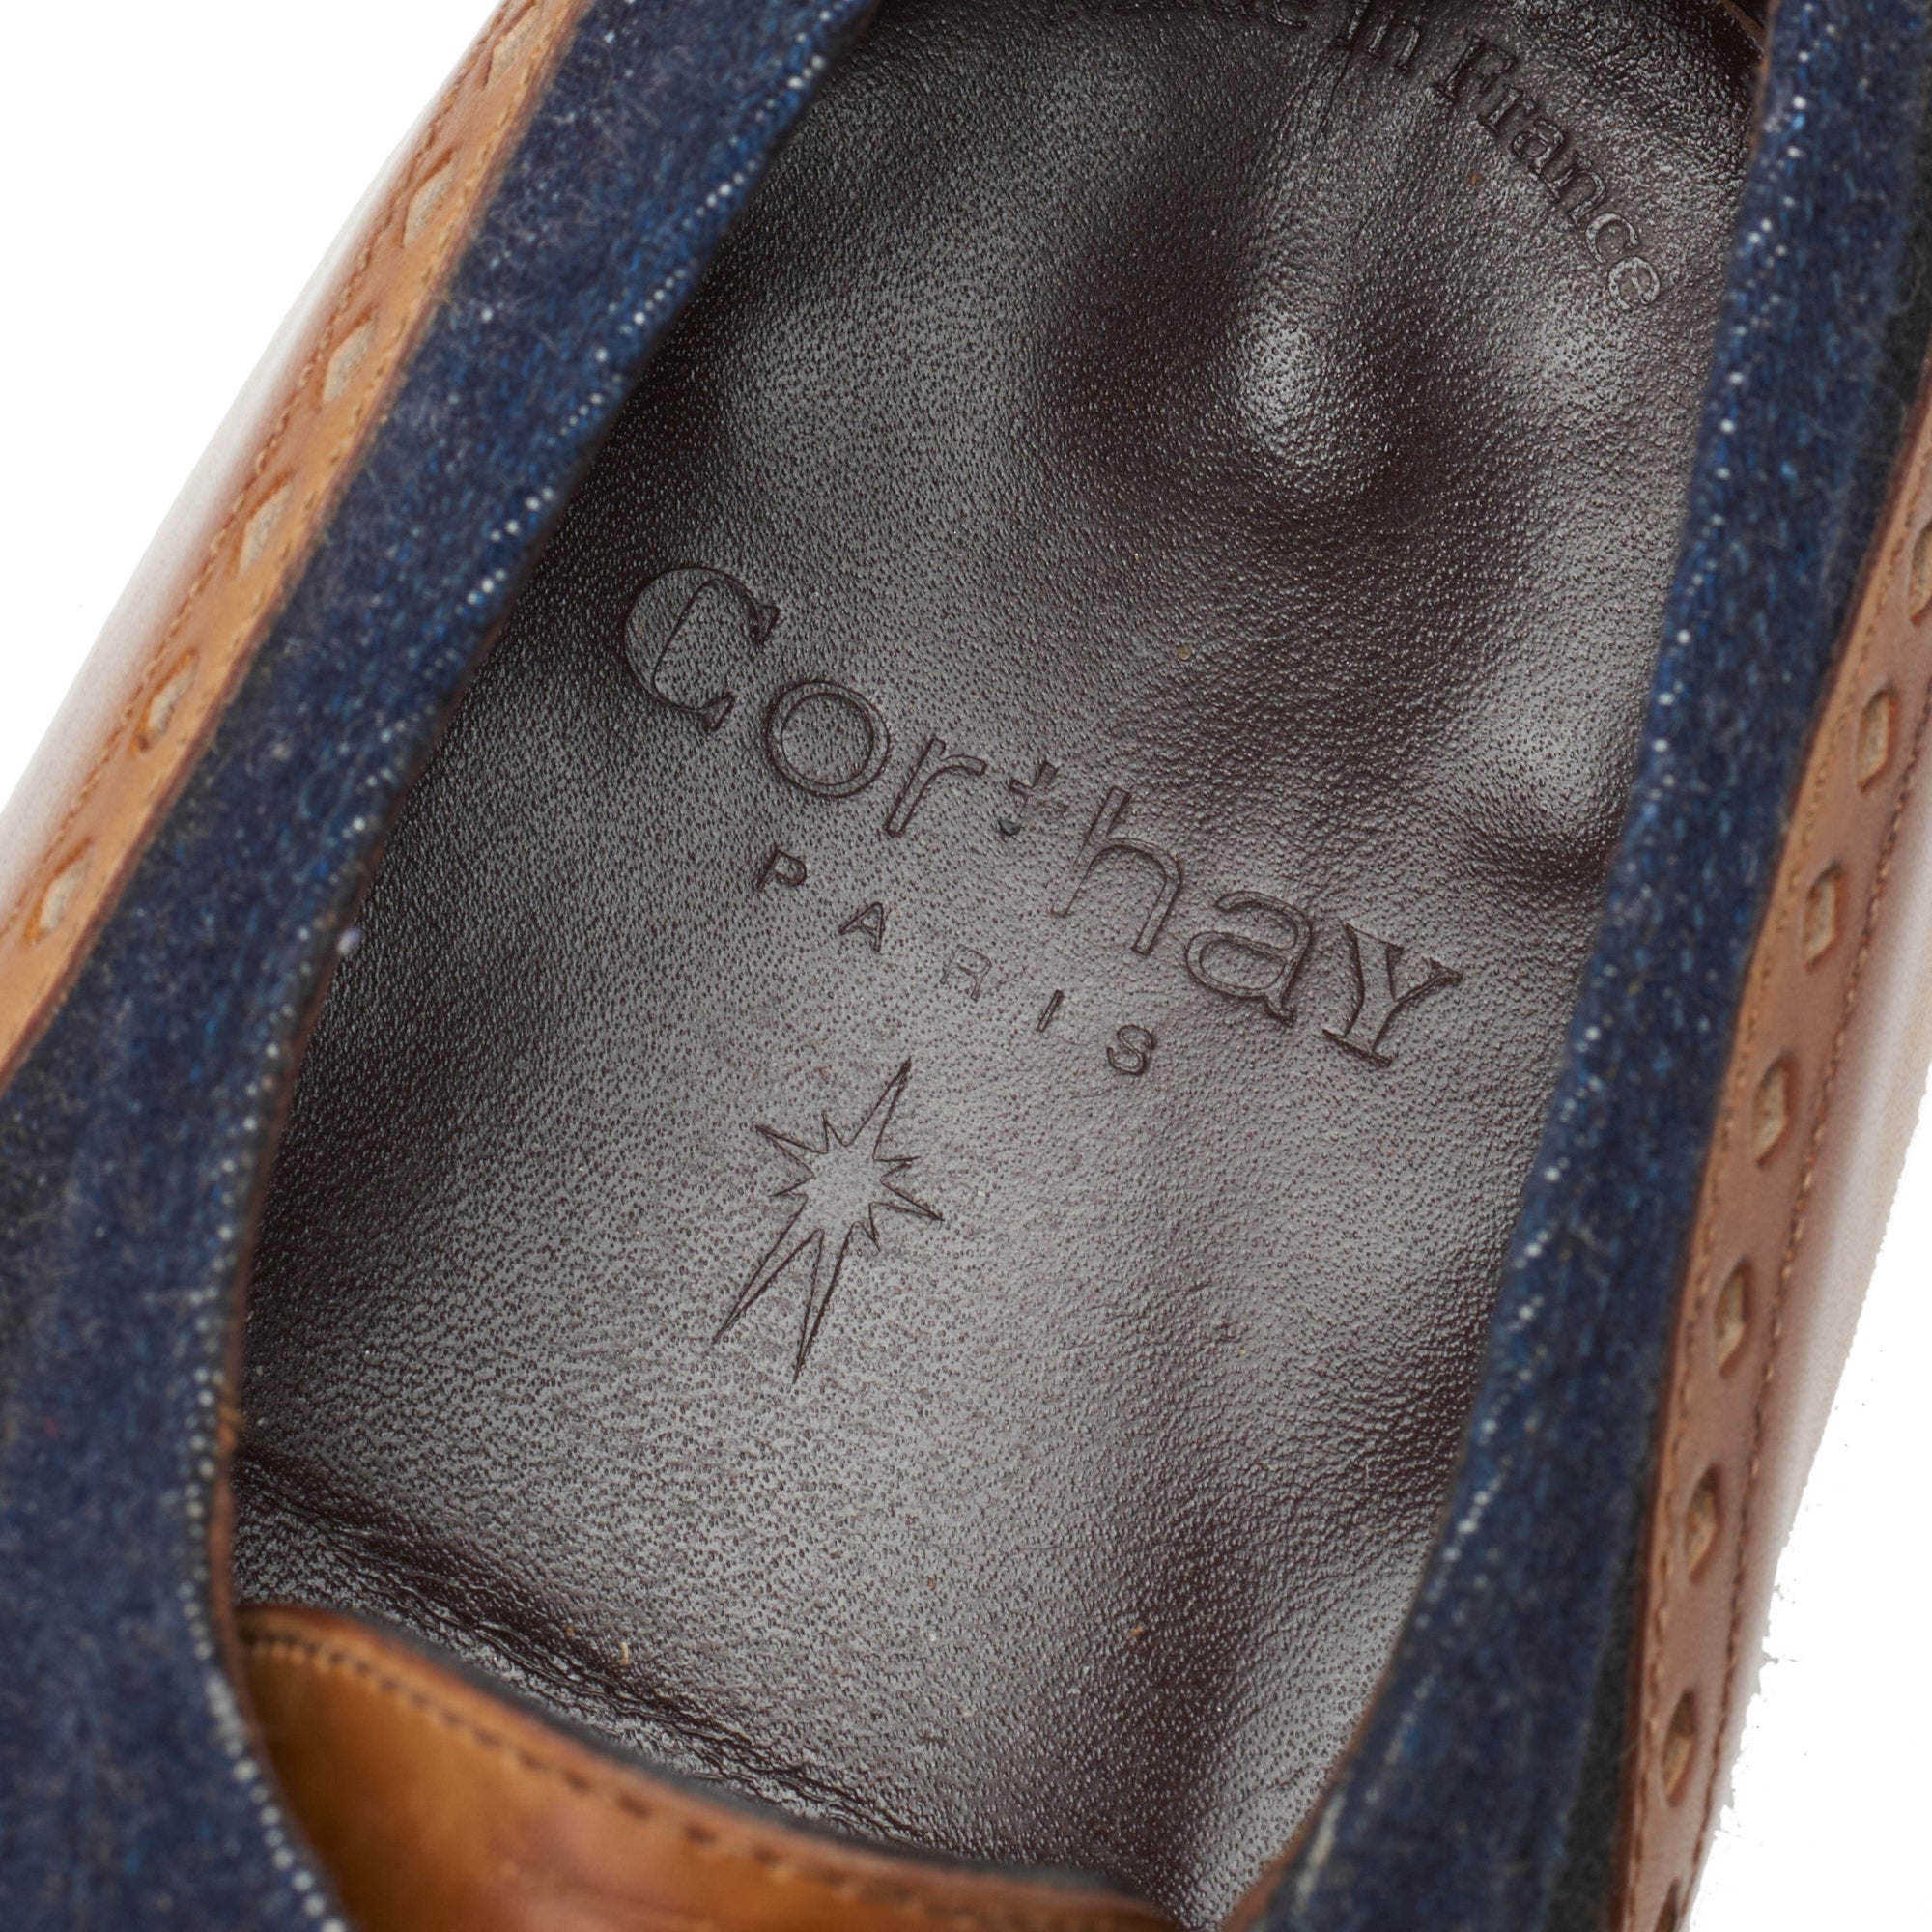 CORTHAY Paris "Wilfrid" Brown Calf Leather 5 Eyelet Oxford Shoes Size 7.5 Trees CORTHAY